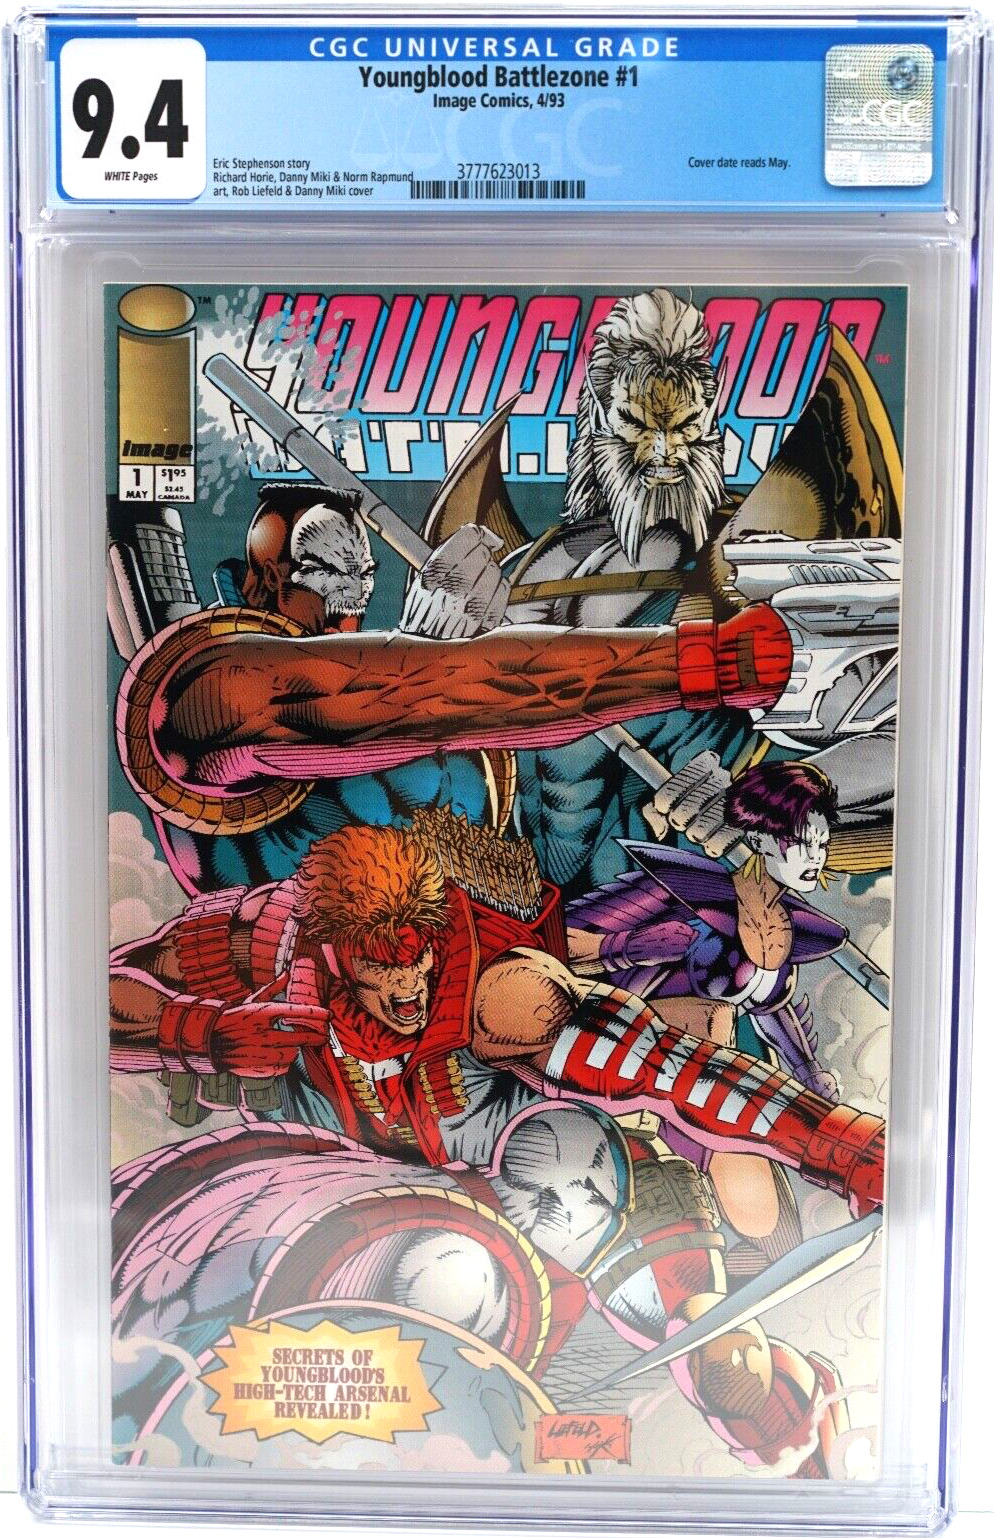 1993 Image Comics Youngblood Battlezone #1 CGC 9.4 Graded Comic Book Rob Liefeld